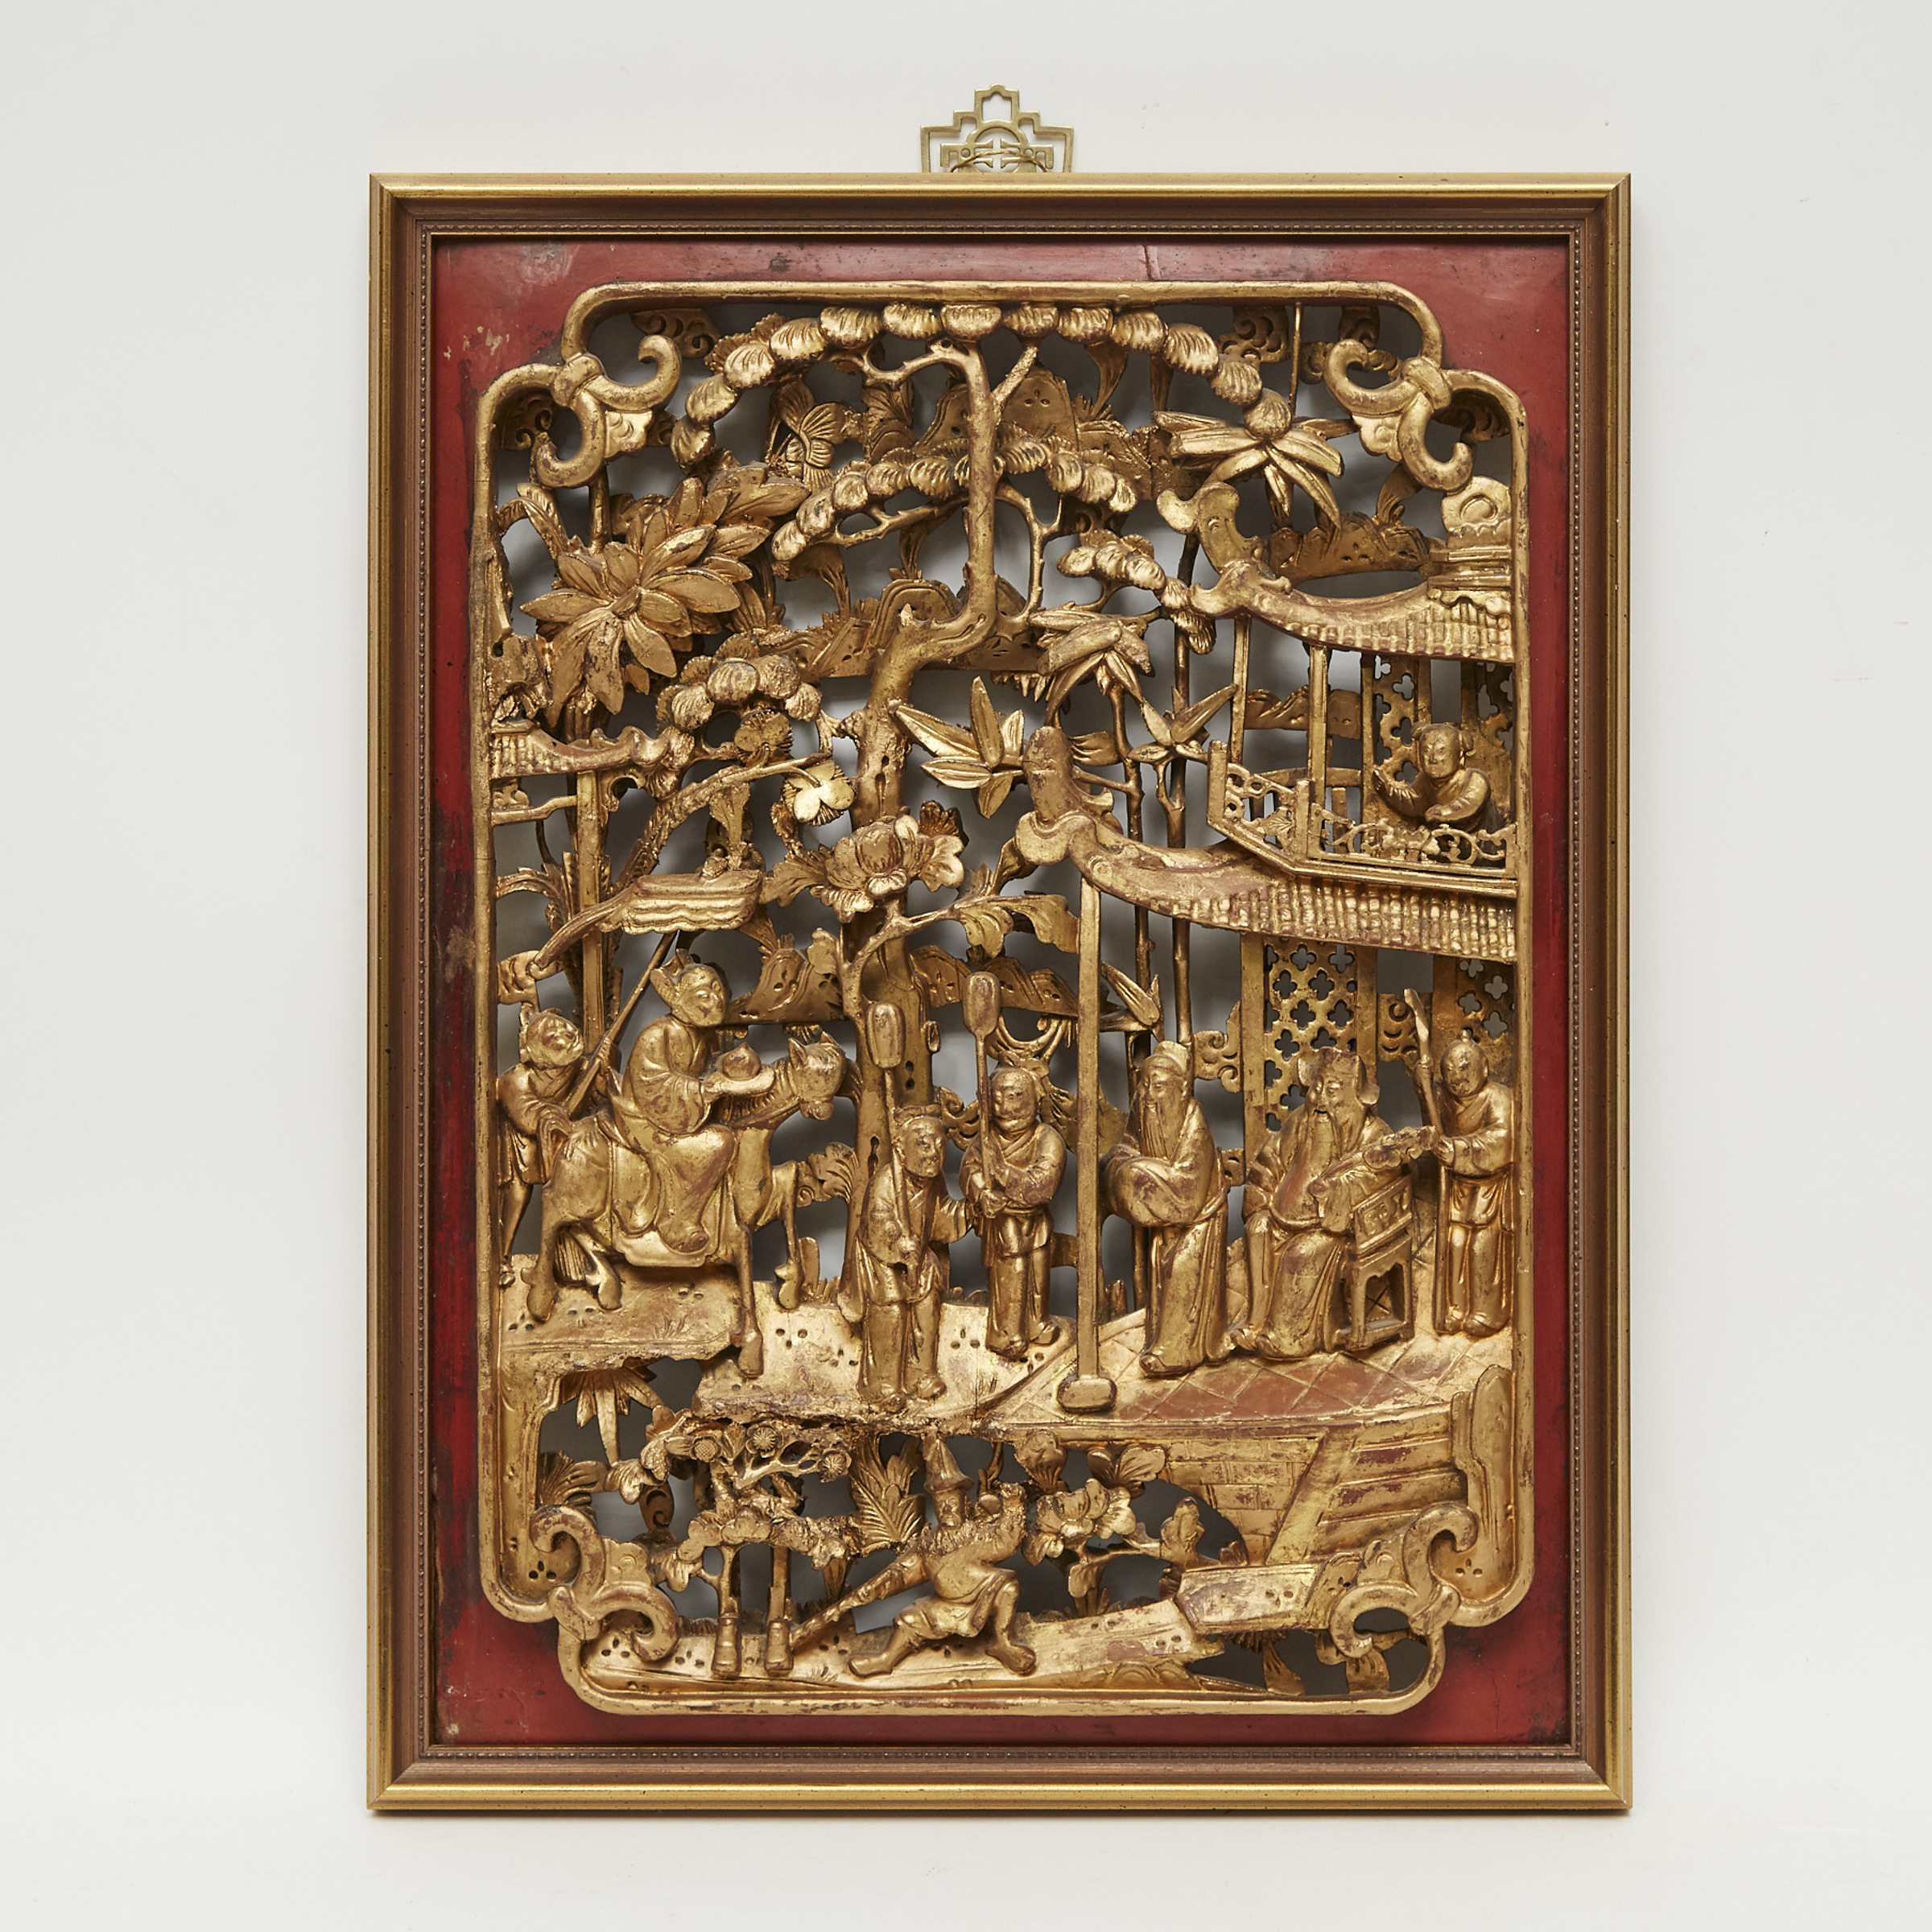 A Framed Chinese Gilt Wood Temple Carving, 19th Century